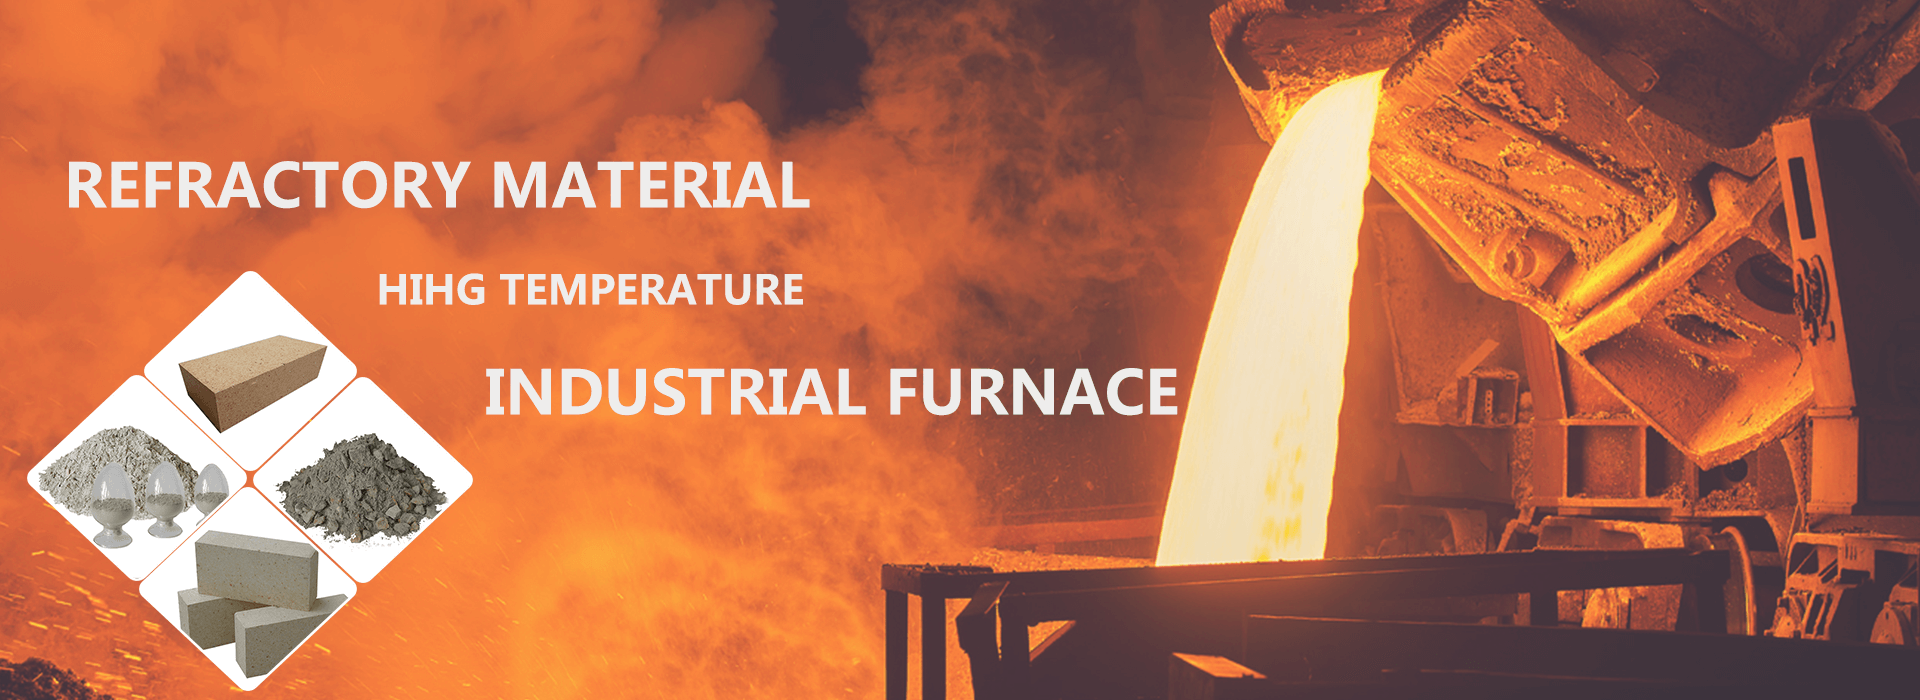 Refractory material factory